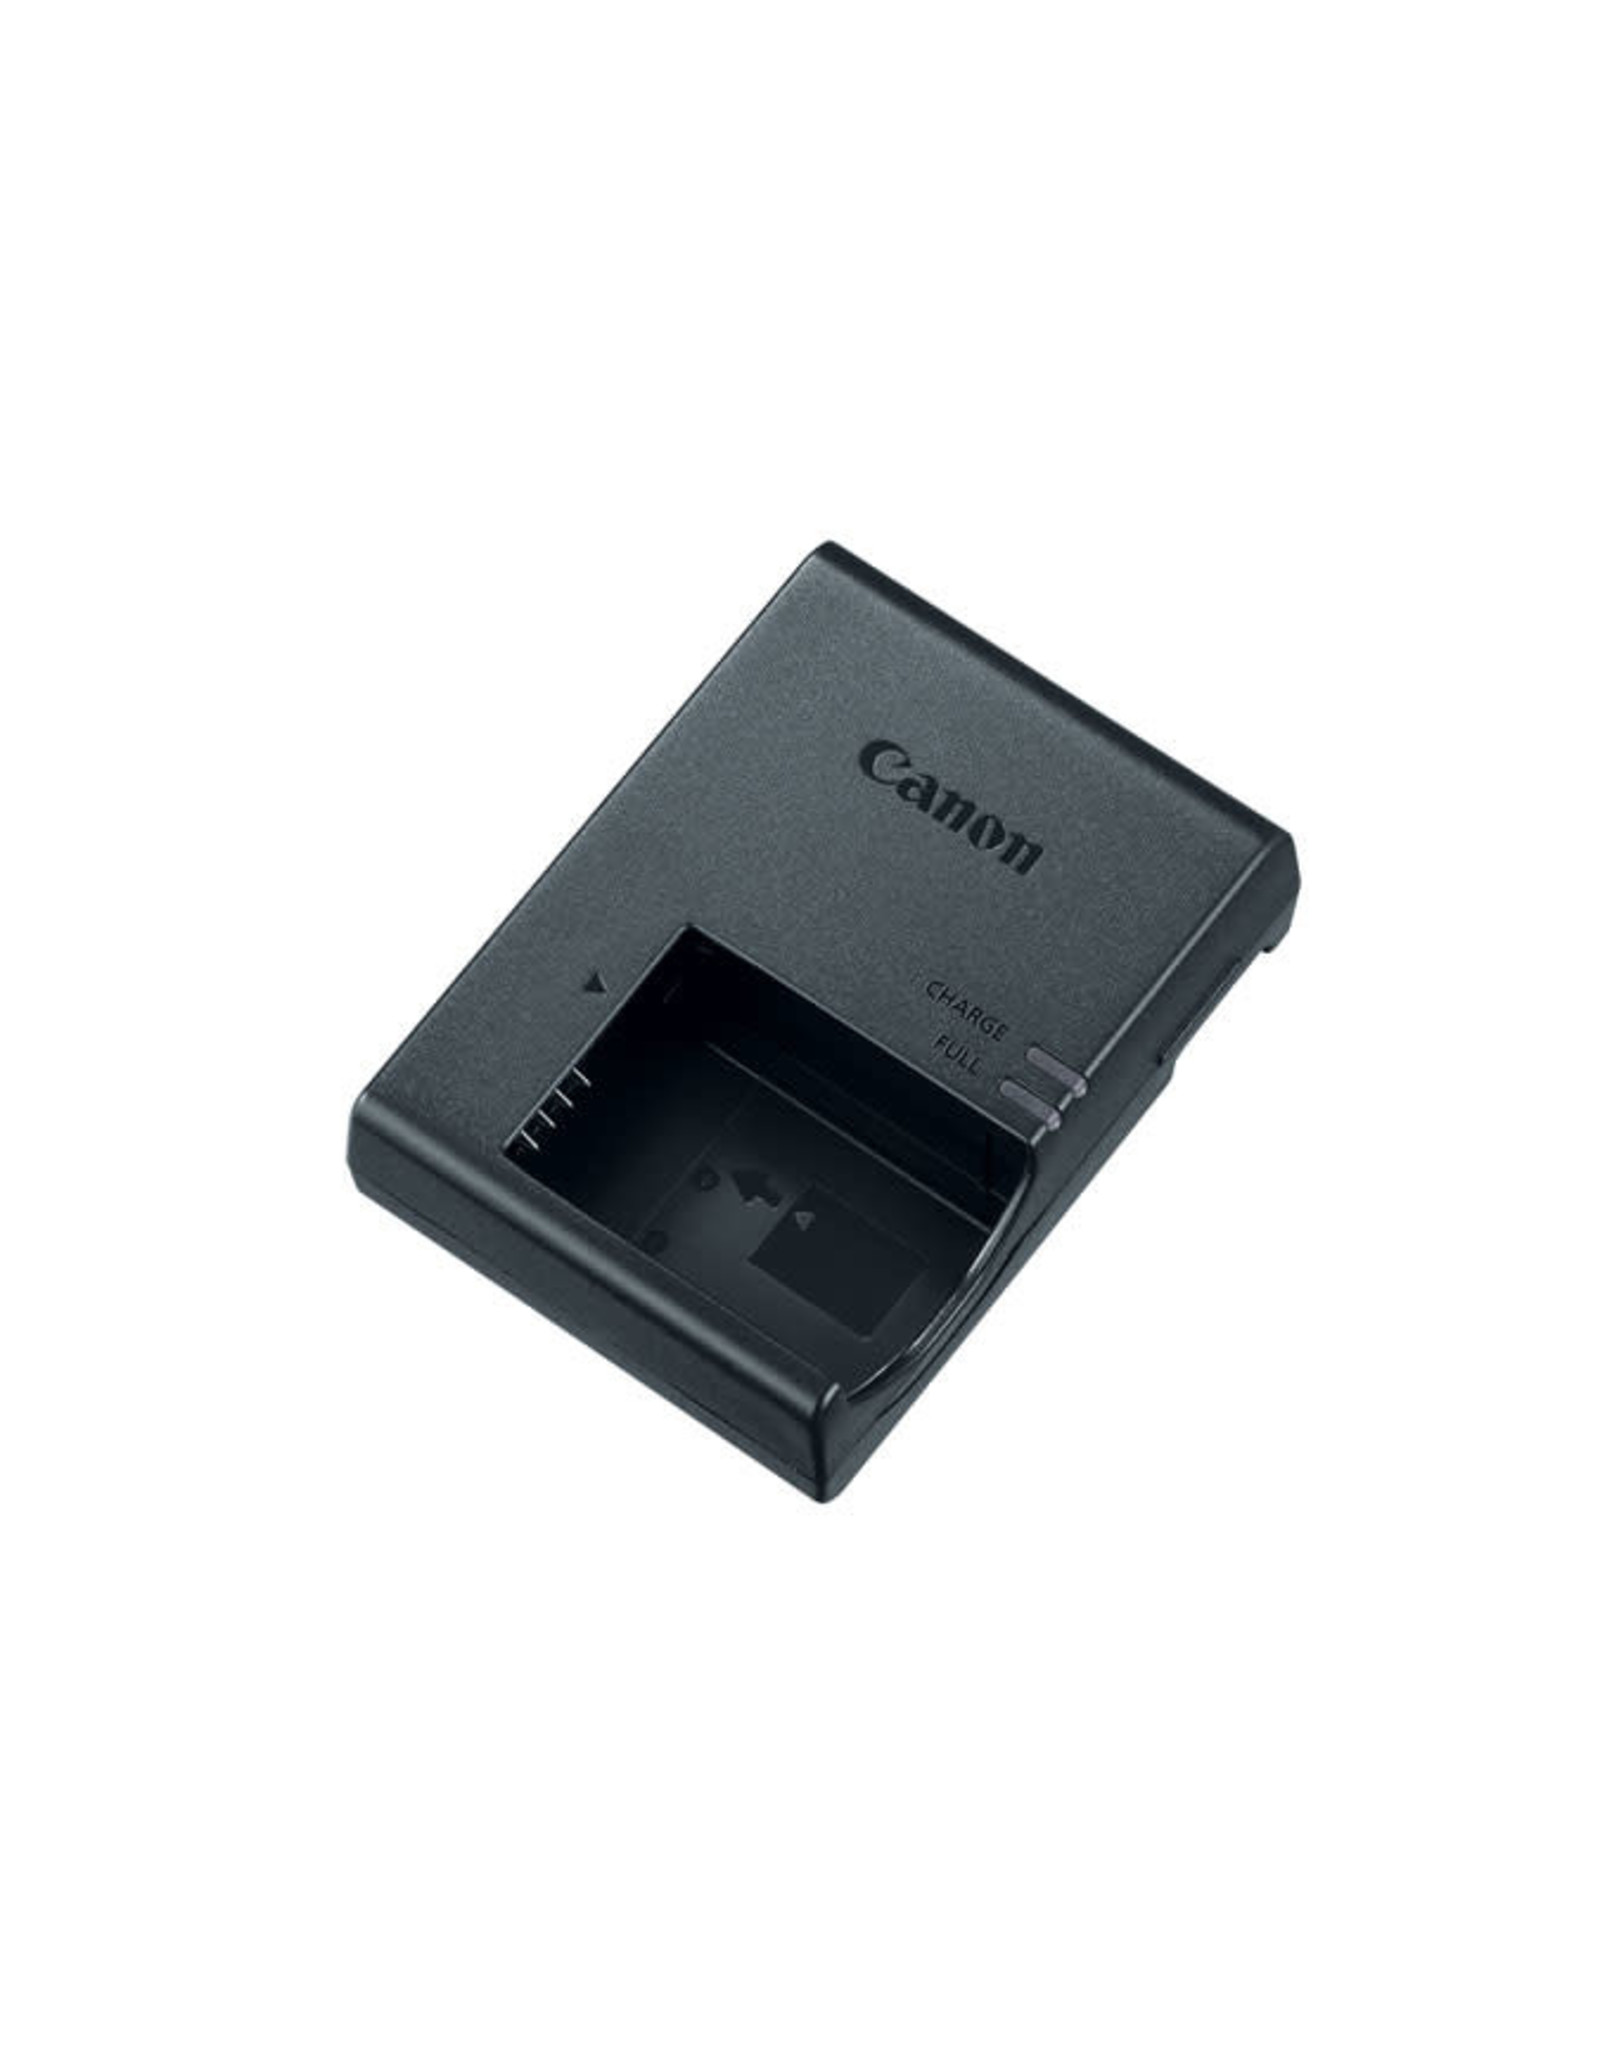 Canon Battery Charger LC-E17 for LP-E17 Battery